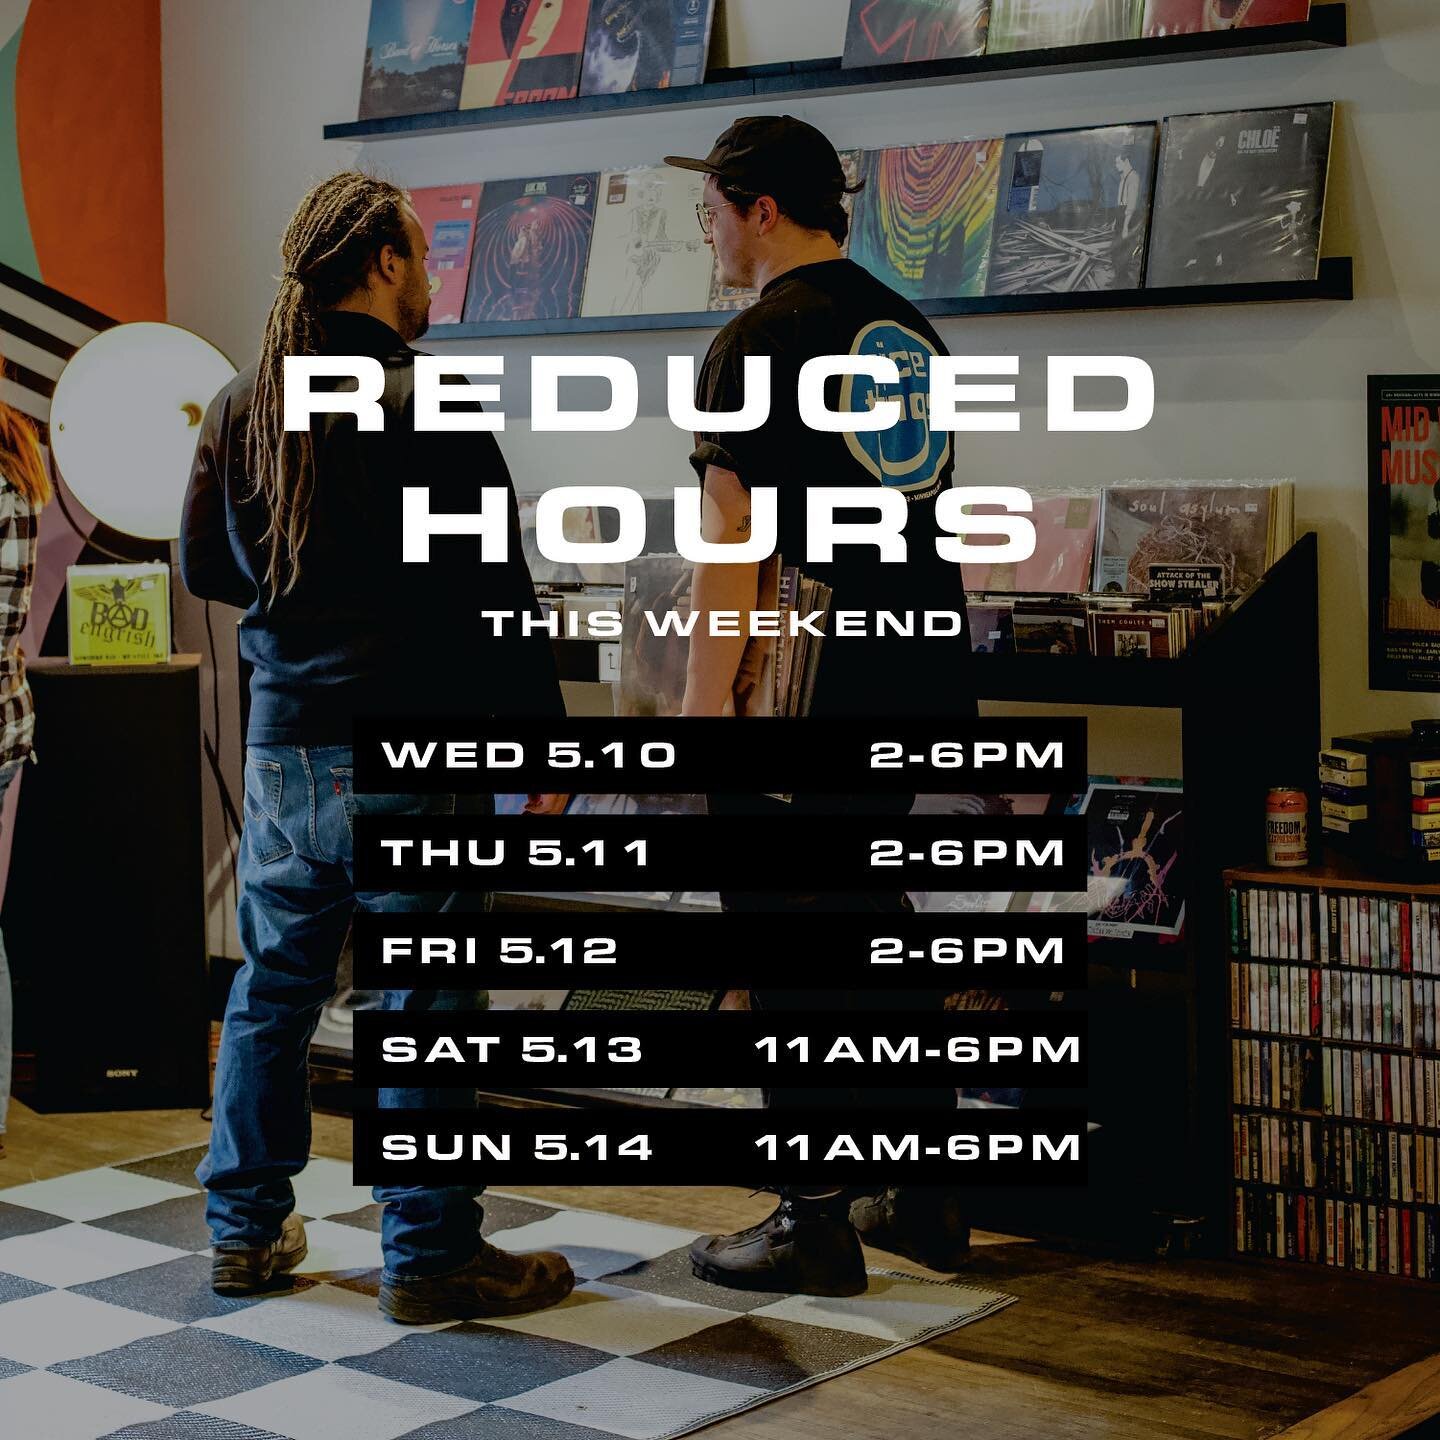 We&rsquo;ve got reduced hours this weekend during Mid West Music Fest - We&rsquo;re proud to act as Production and Creative Directors of the fest! Get your shopping done by 6pm and get over to Winona for a rad time with us. 

#mnmusic #recordstore #r